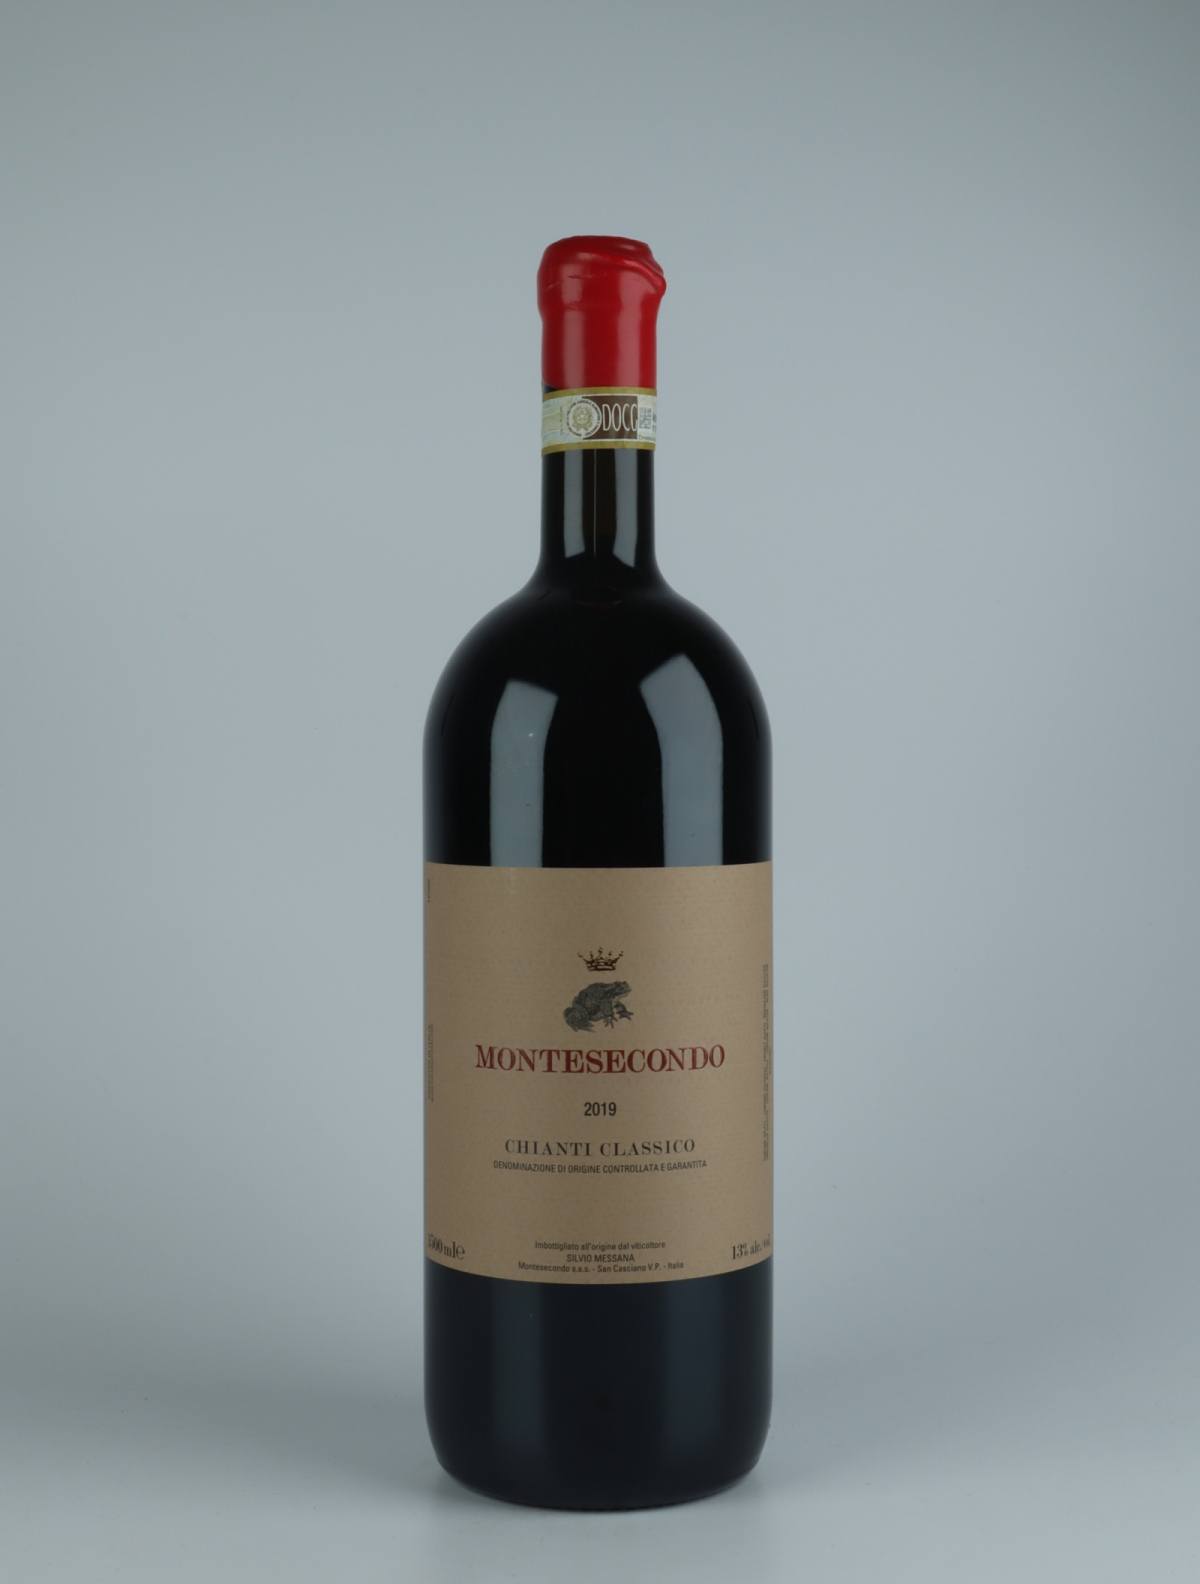 A bottle 2019 Chianti Classico Red wine from Montesecondo, Tuscany in Italy